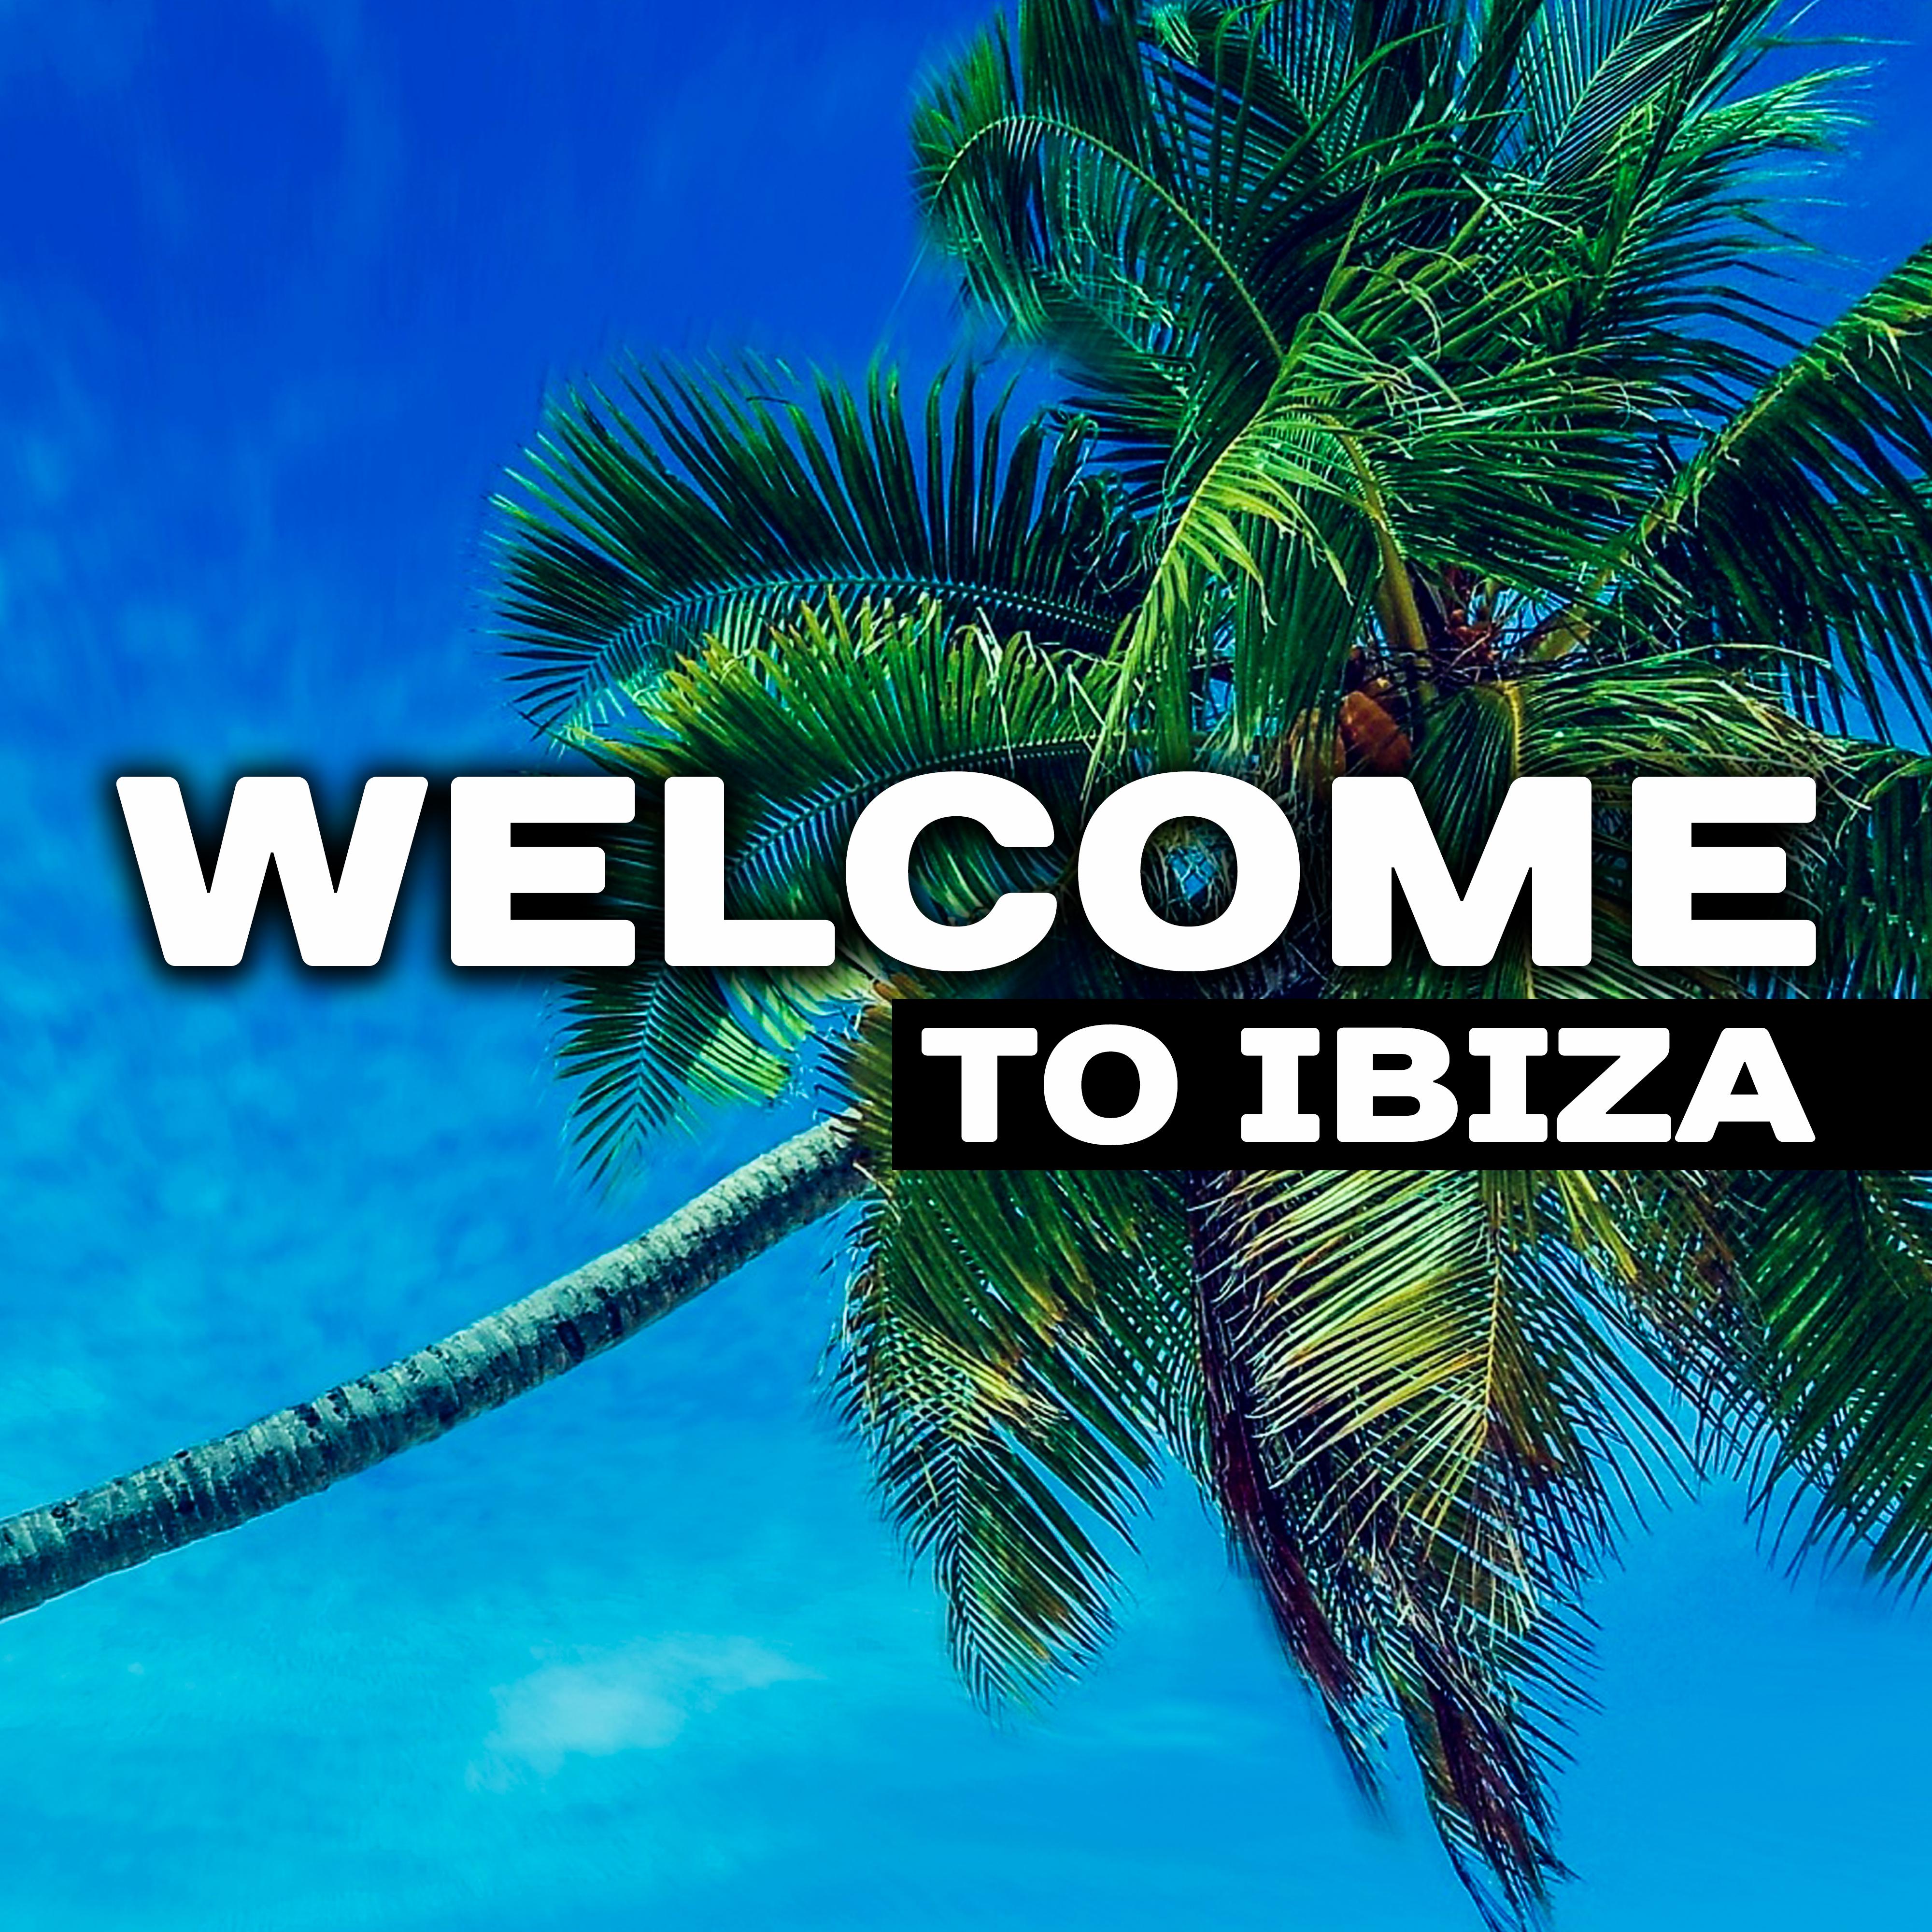 Welcome to Ibiza – Summer Chill Out, Beach Party, Relaxing Music, Good Vibrations, Pure Rest, Deep Sun, Party Night